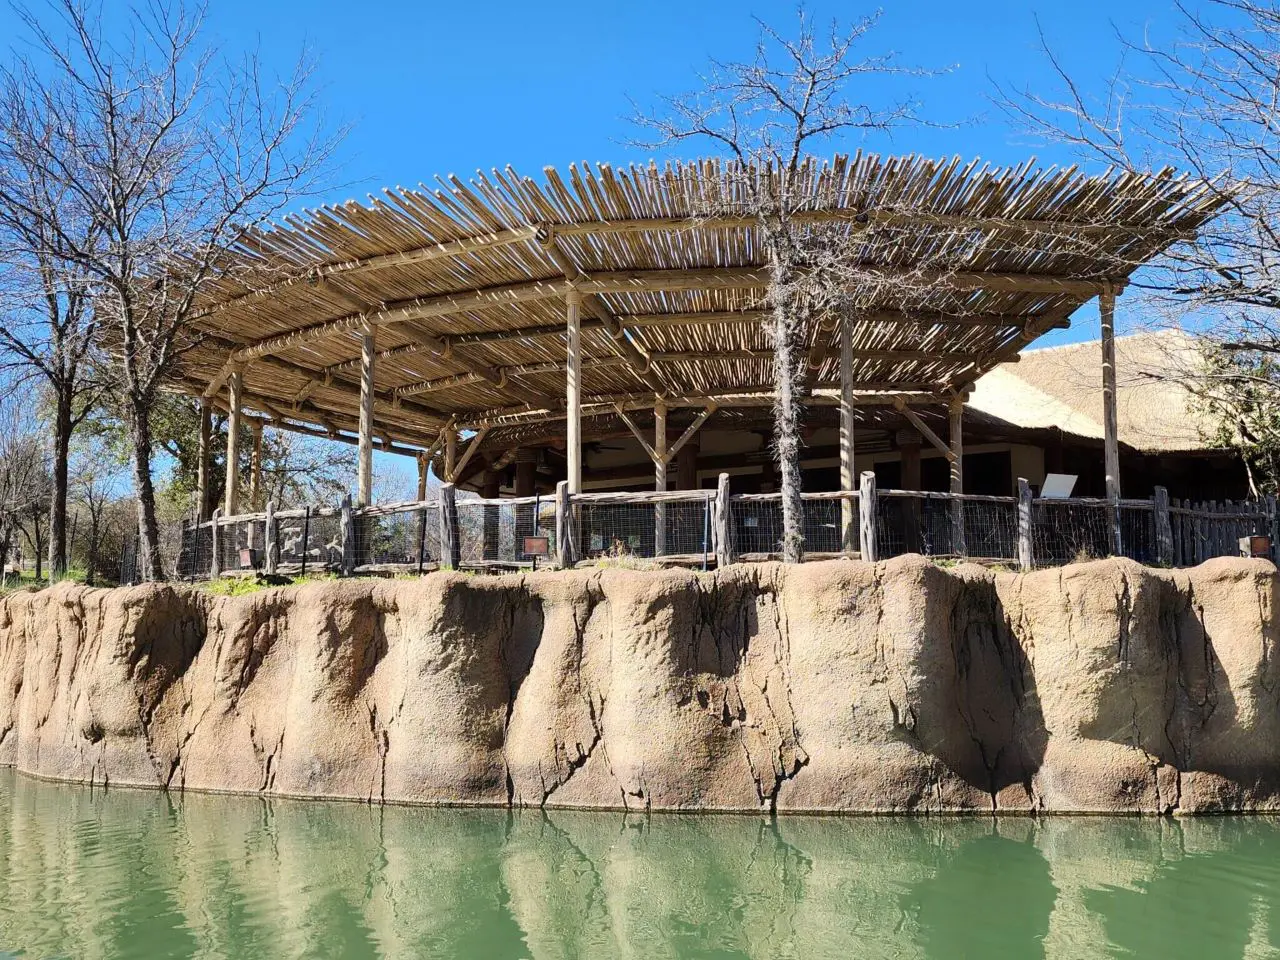 A zoo with a wooden structure and a pond.